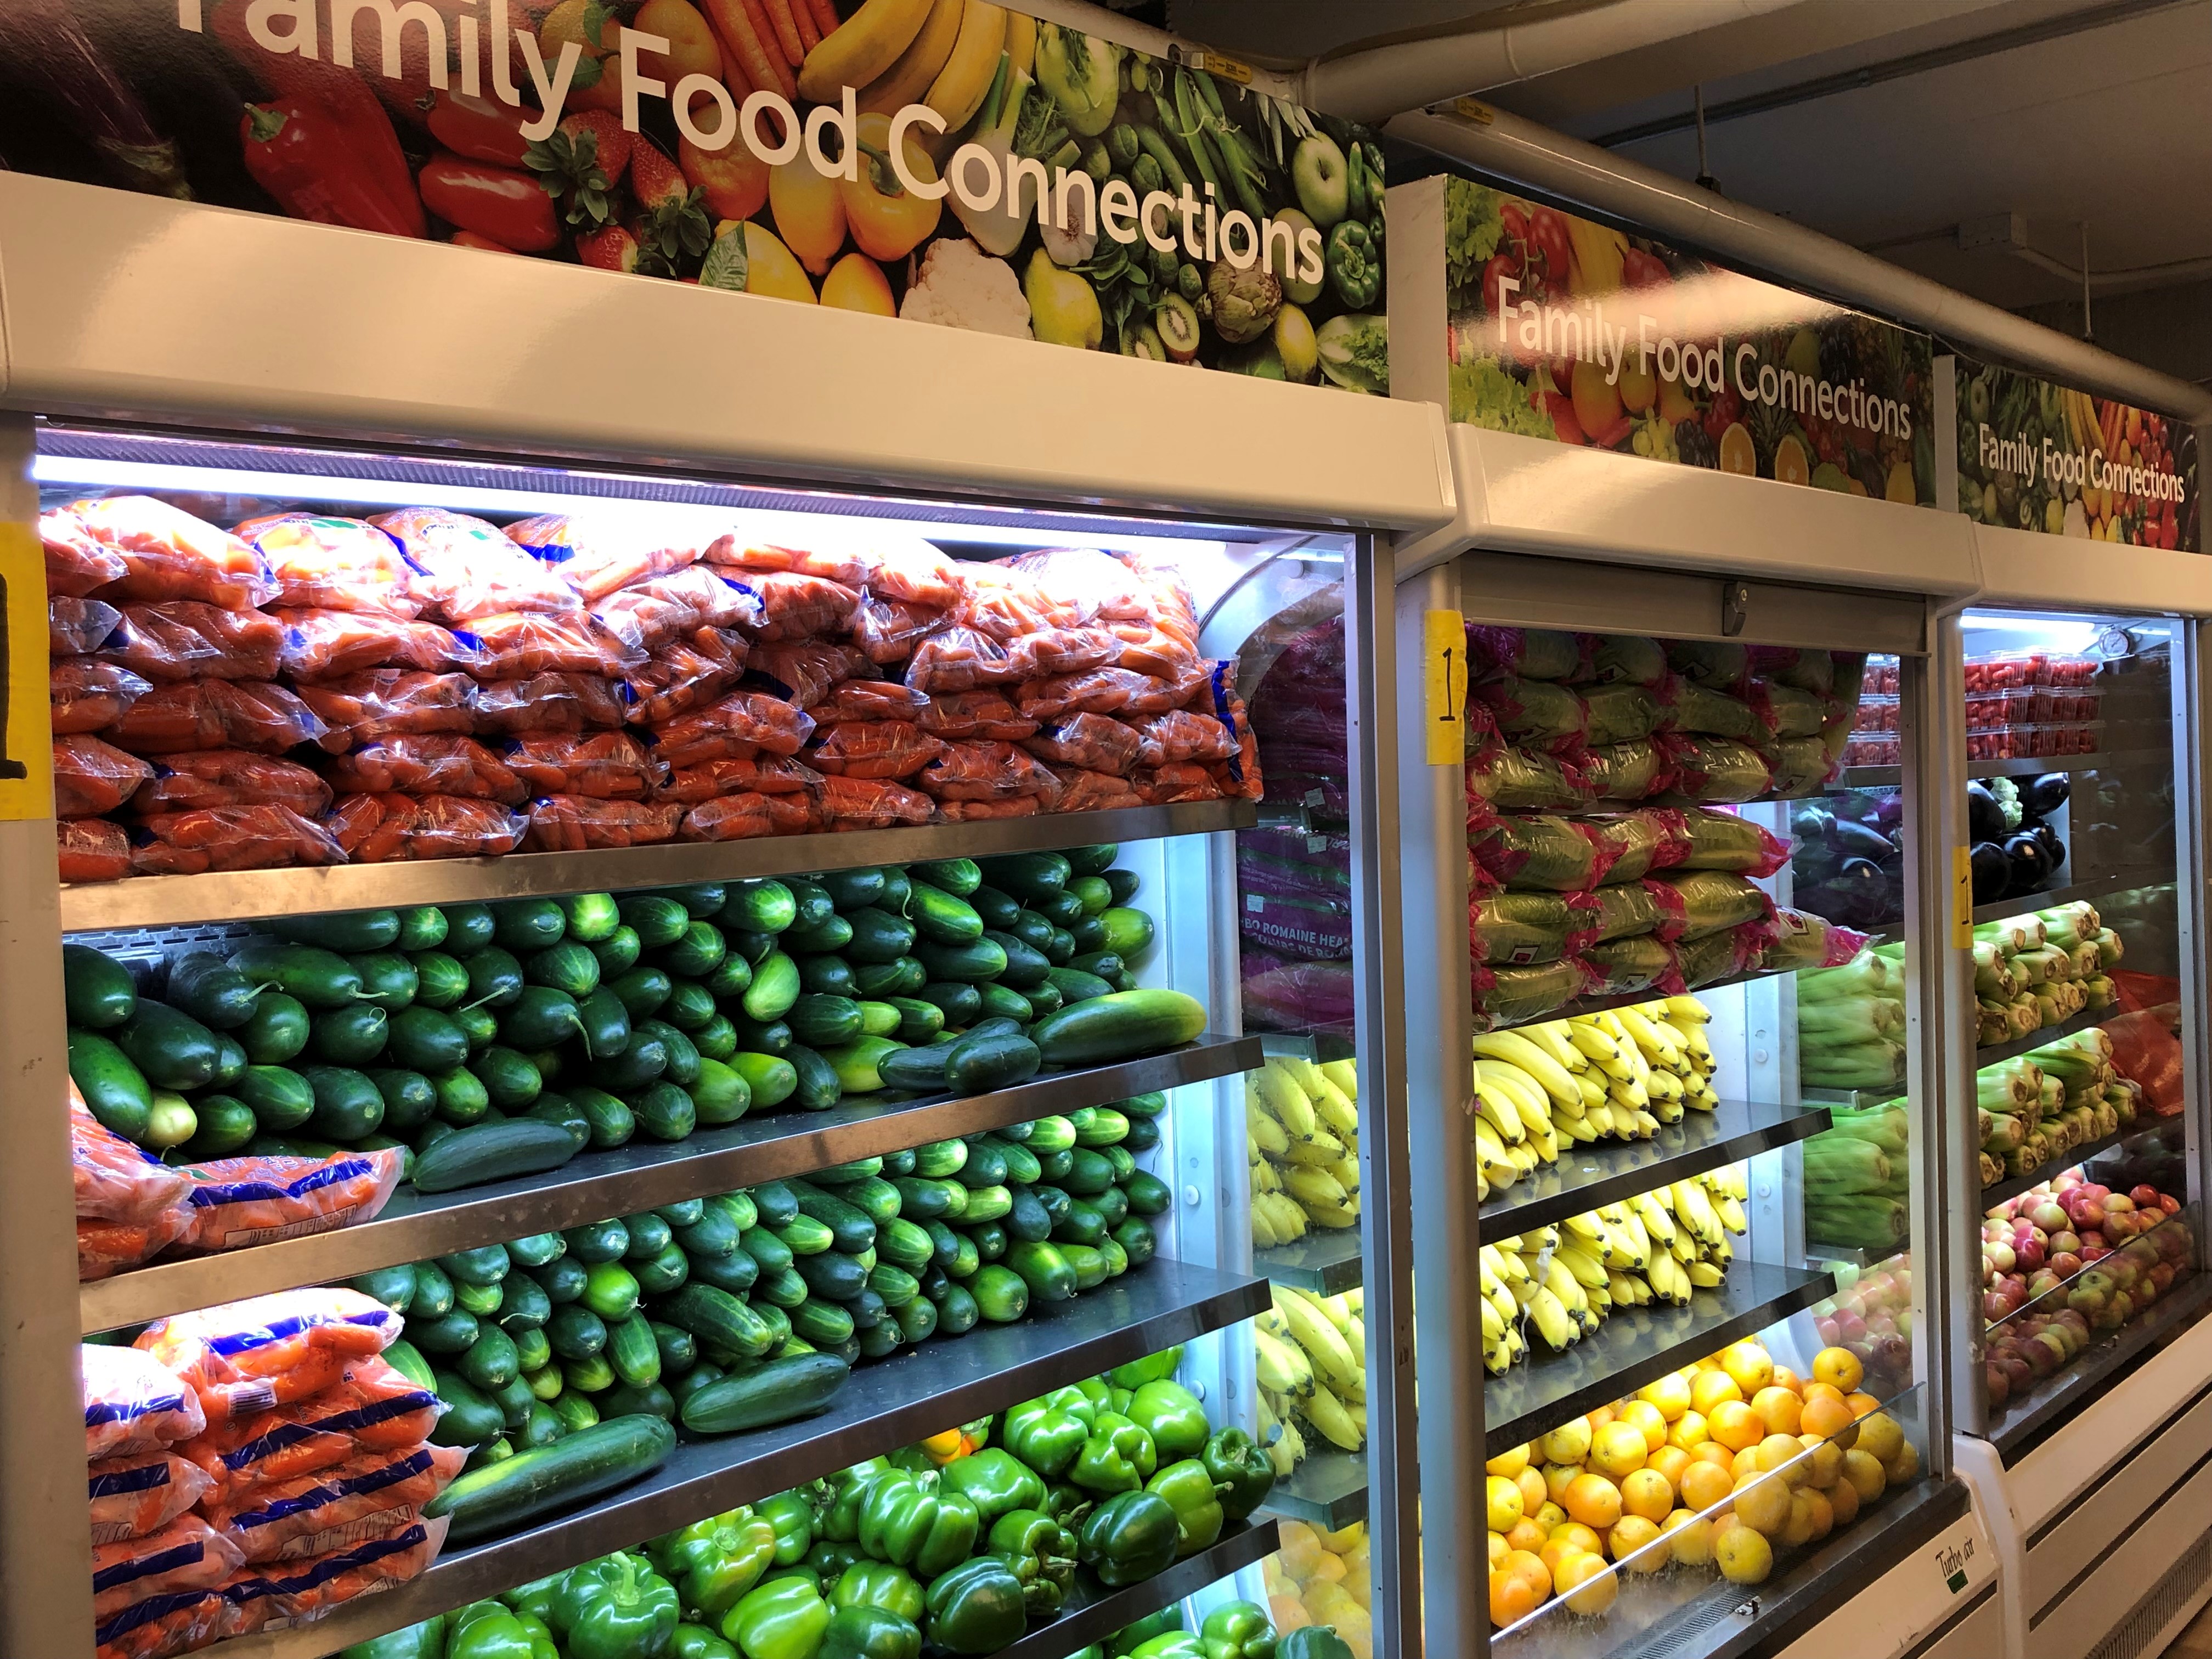 Family Food Connections shelved with various forms of produce.